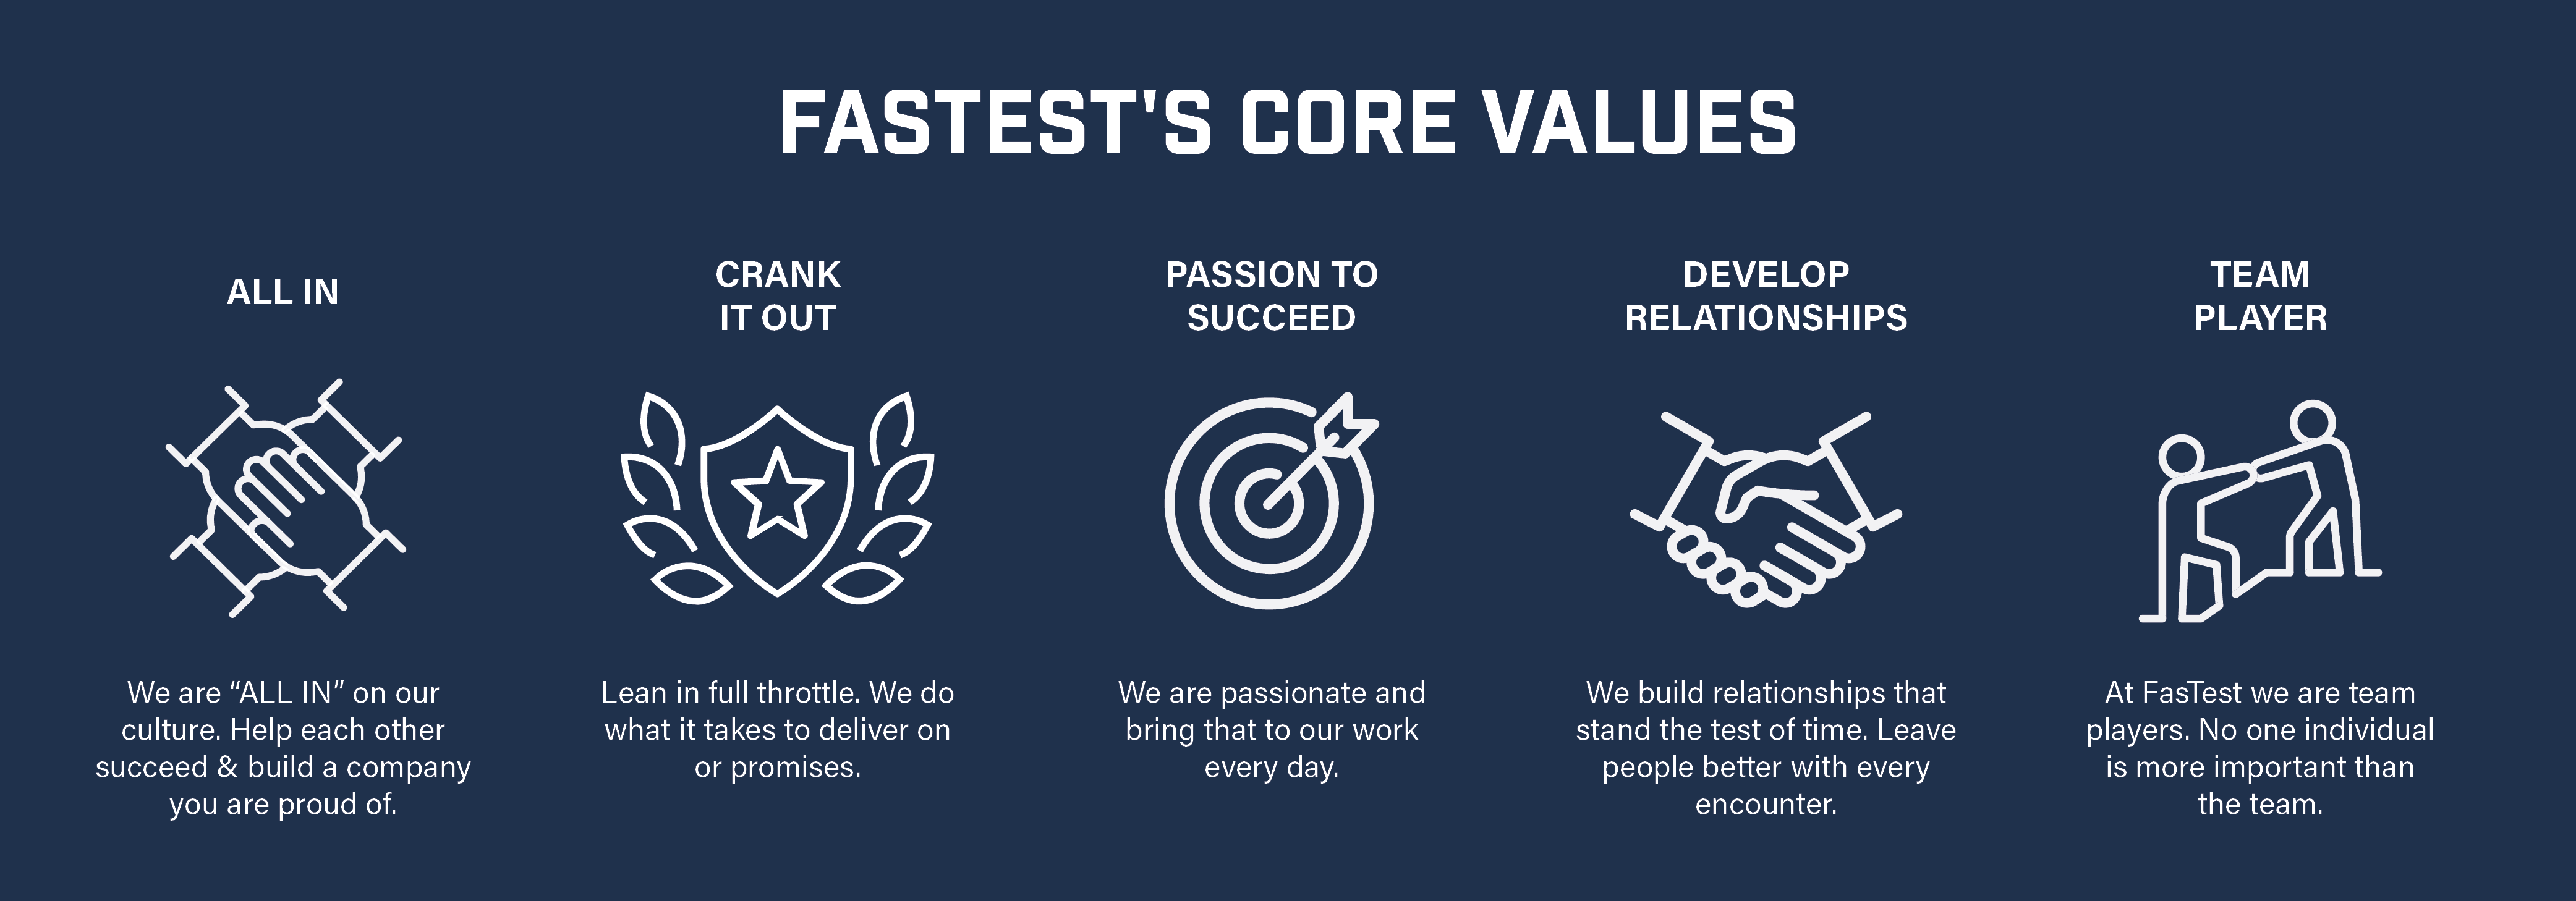 FasTest core values. All in on our culture. Deliver on promises. Passion to succeed. Develop relationships. Team player. 